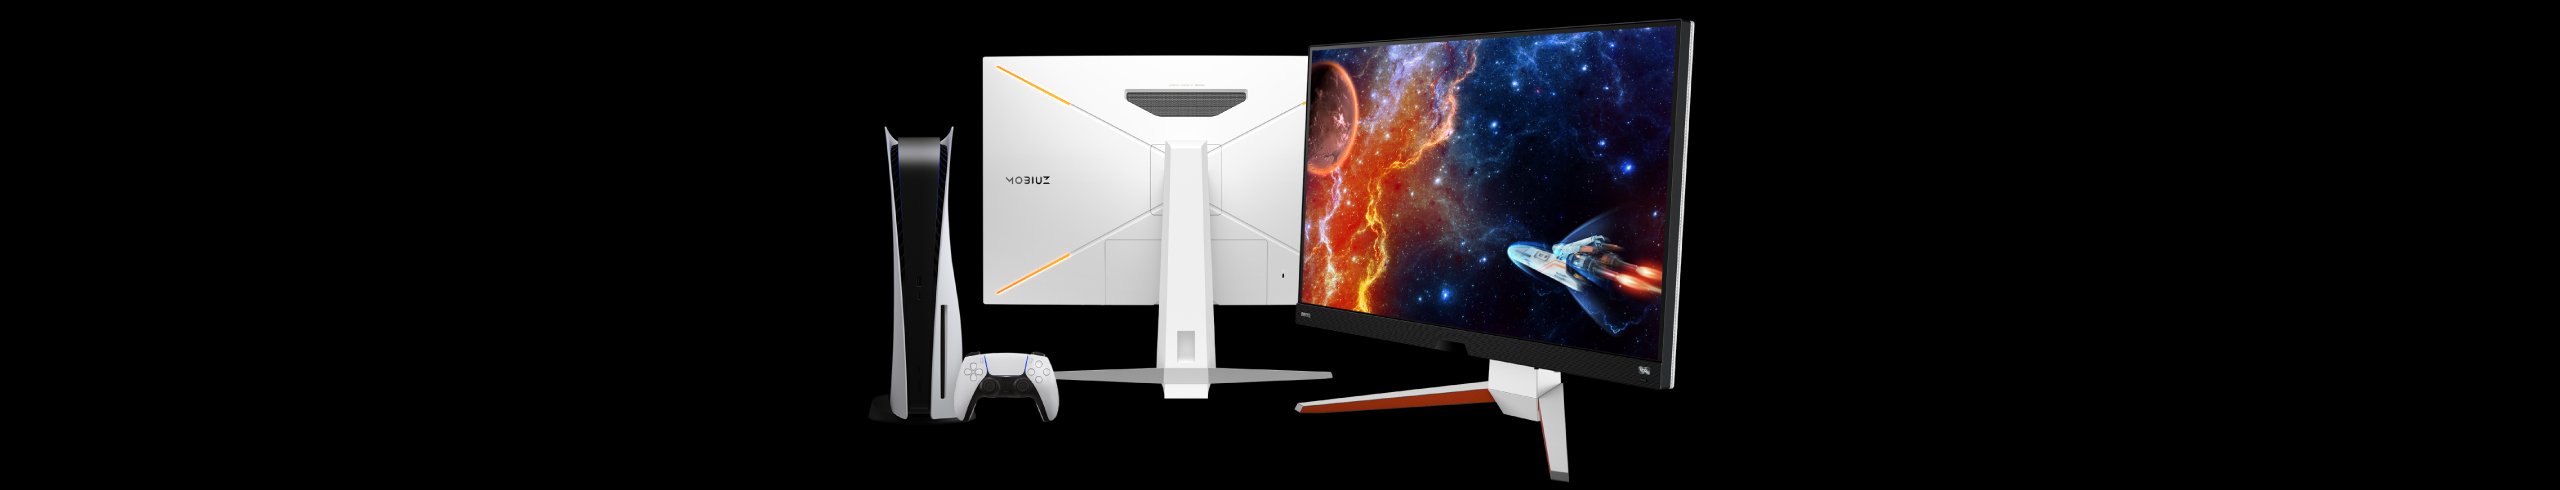 BenQ MOBIUZ gaming monitors provide total immersion in the game